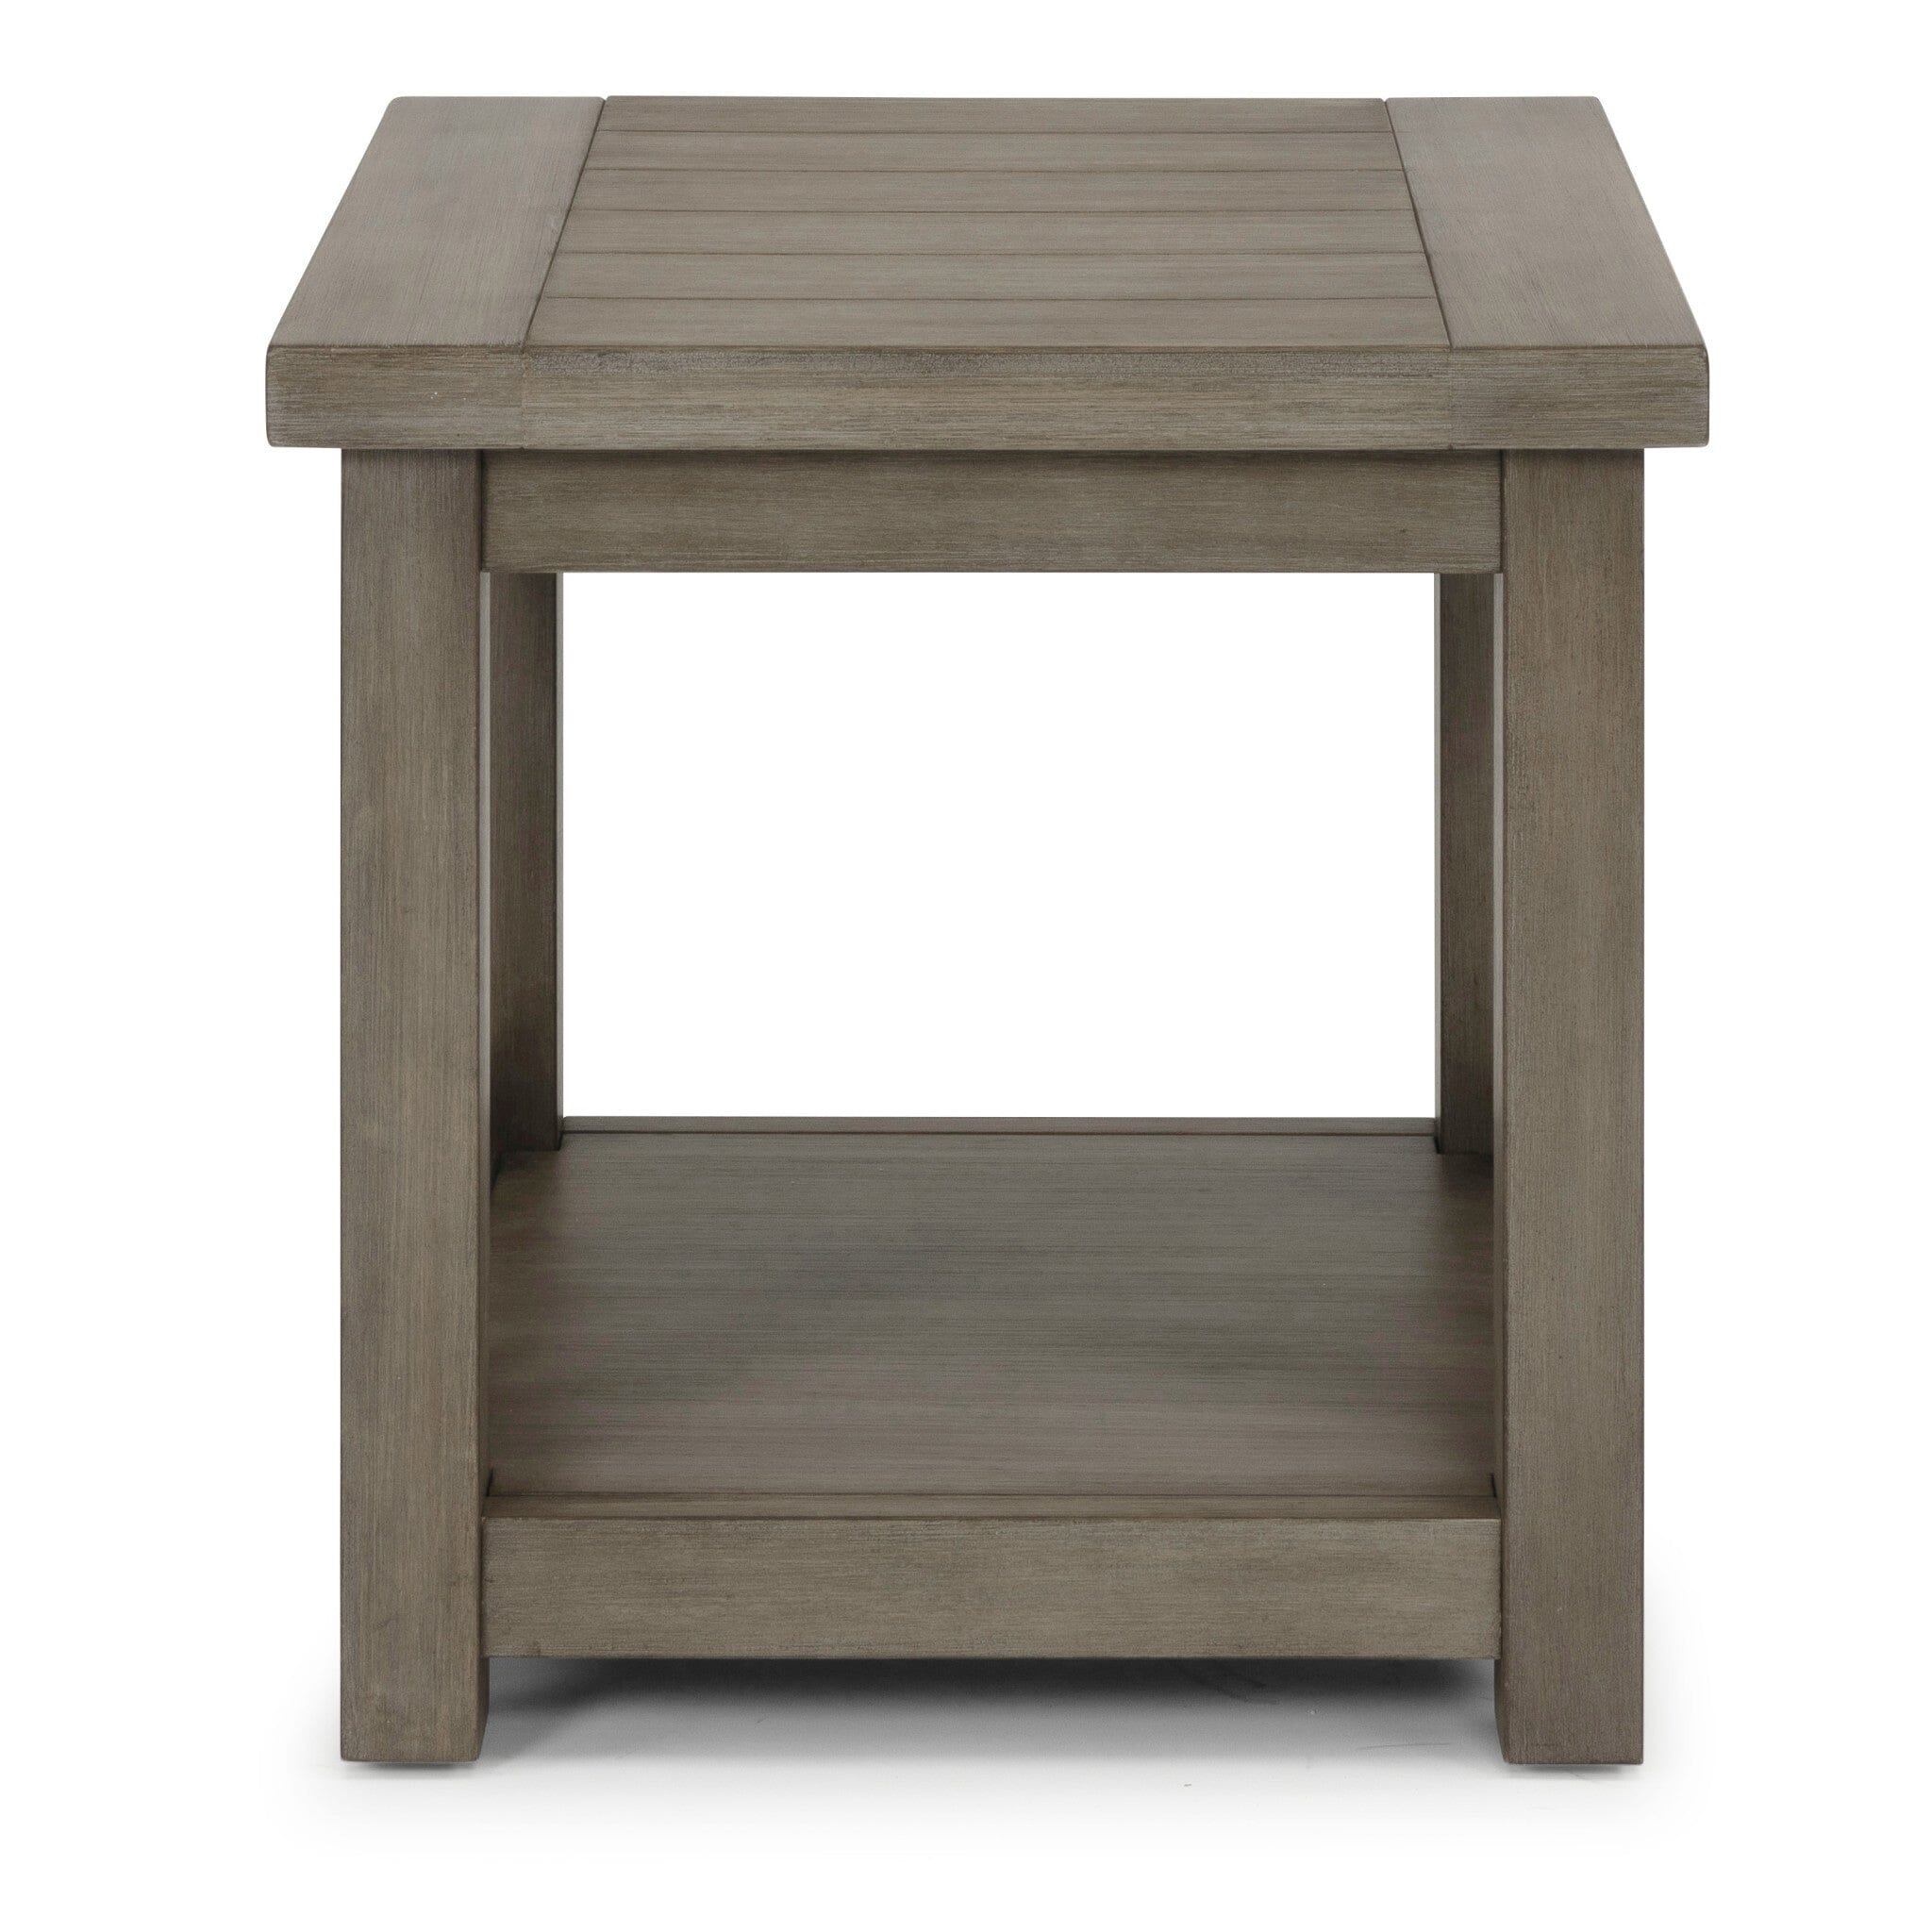 Rustic Farmhouse End Table By Mountain Lodge End Table Mountain Lodge